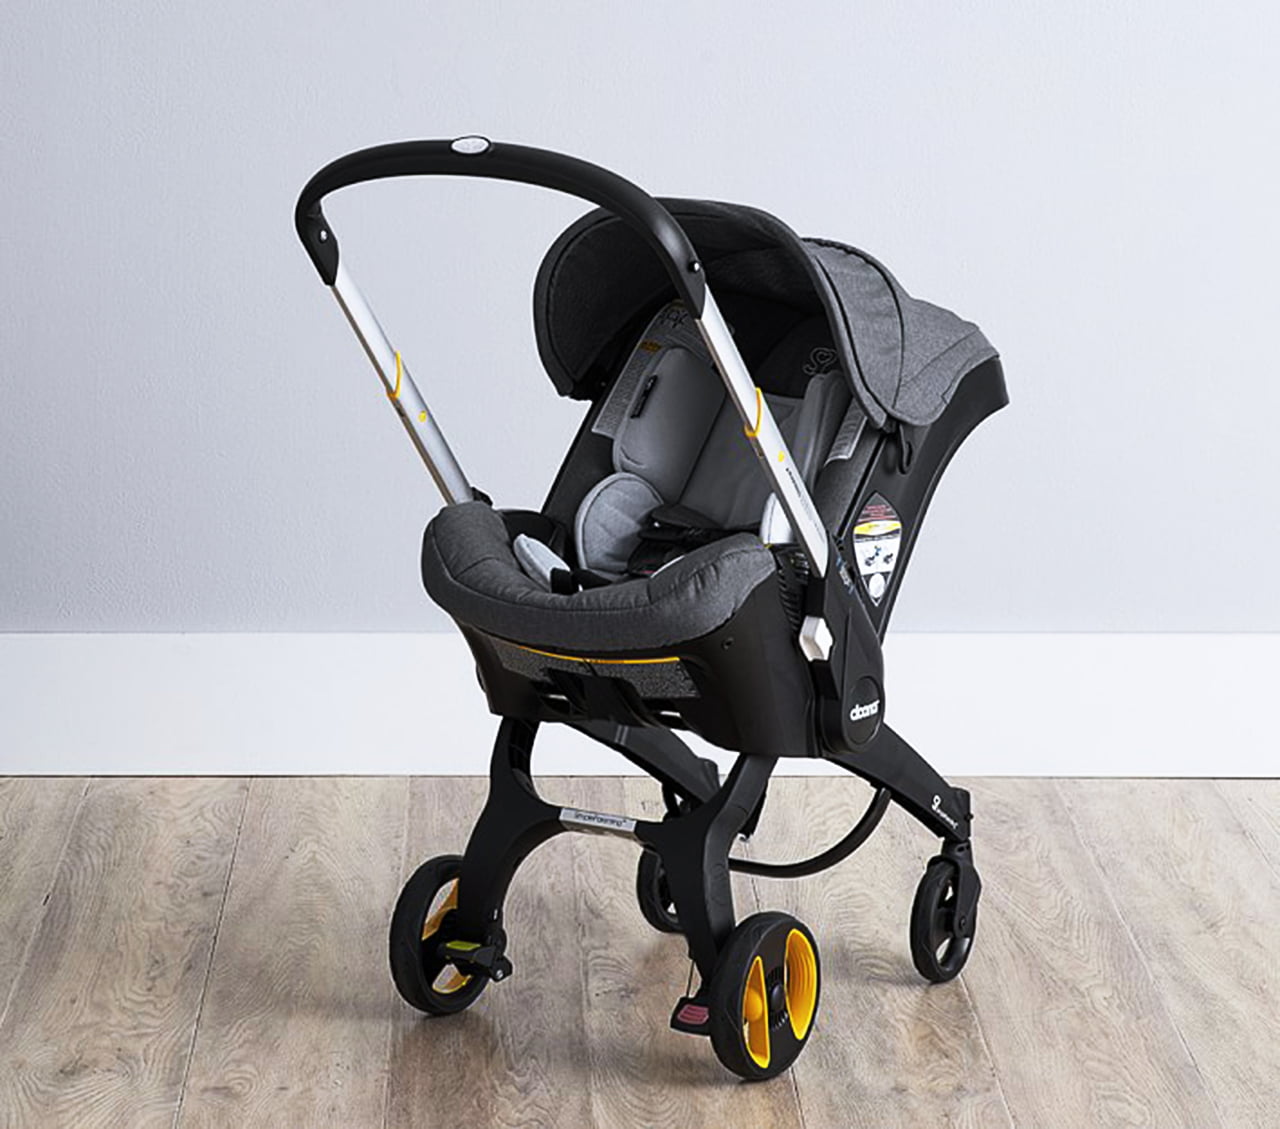 The 4 in 1 Next Generation Car Seat & Stroller